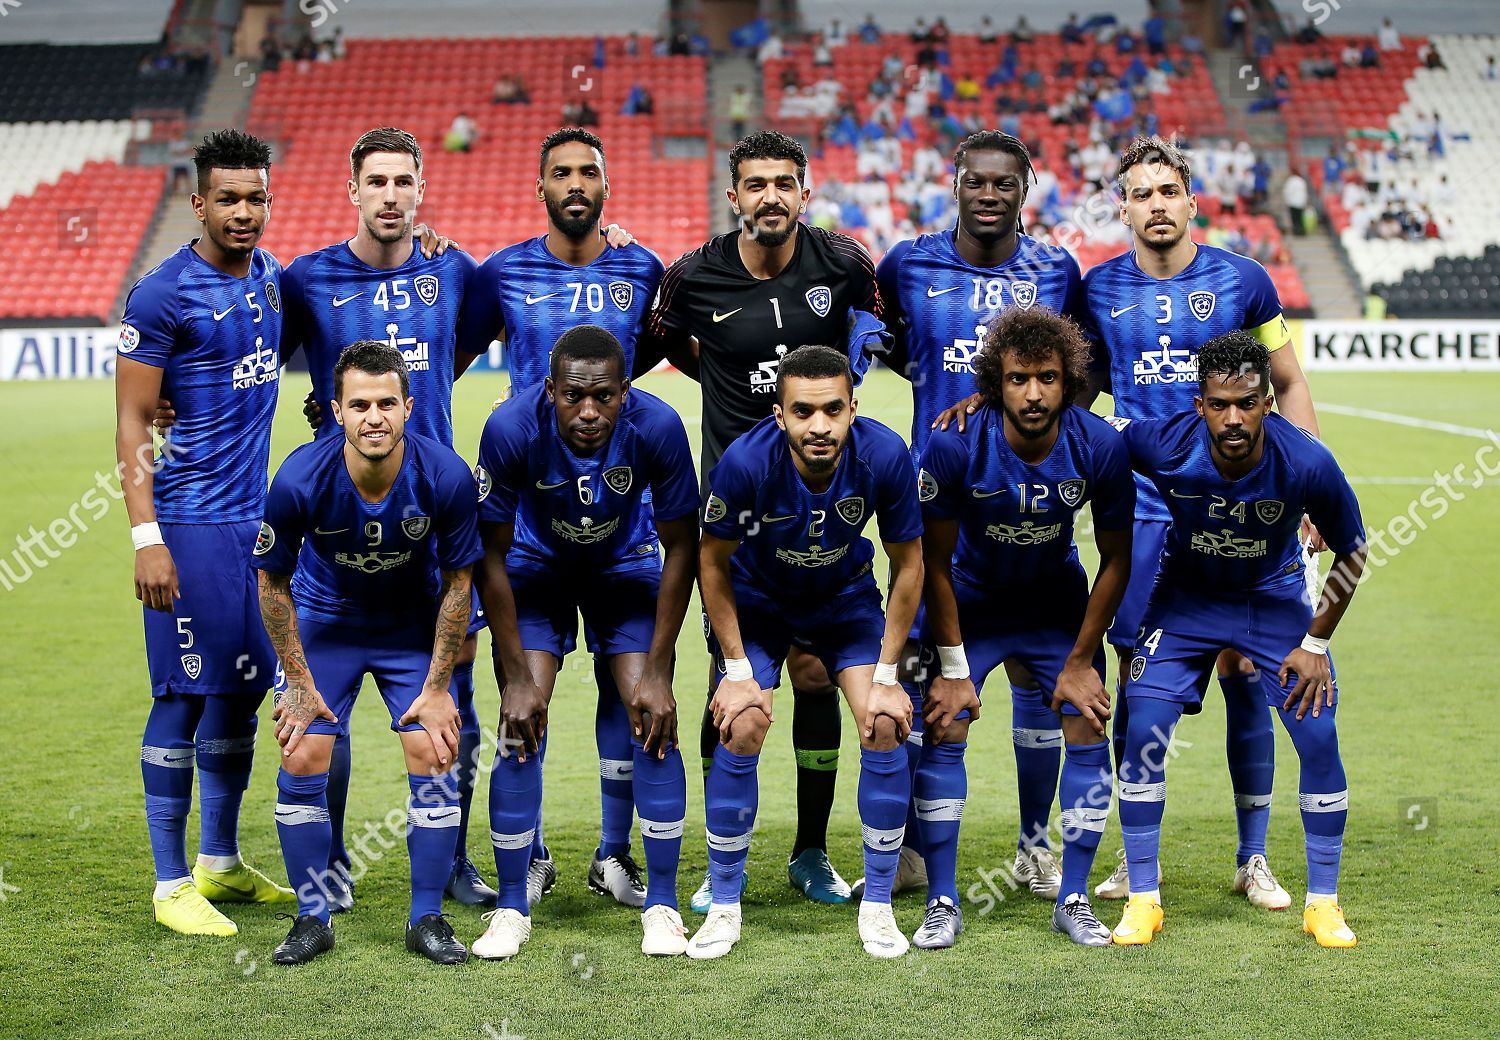 Players Al Hilal Fc Pose Before Editorial Stock Photo - Stock Image